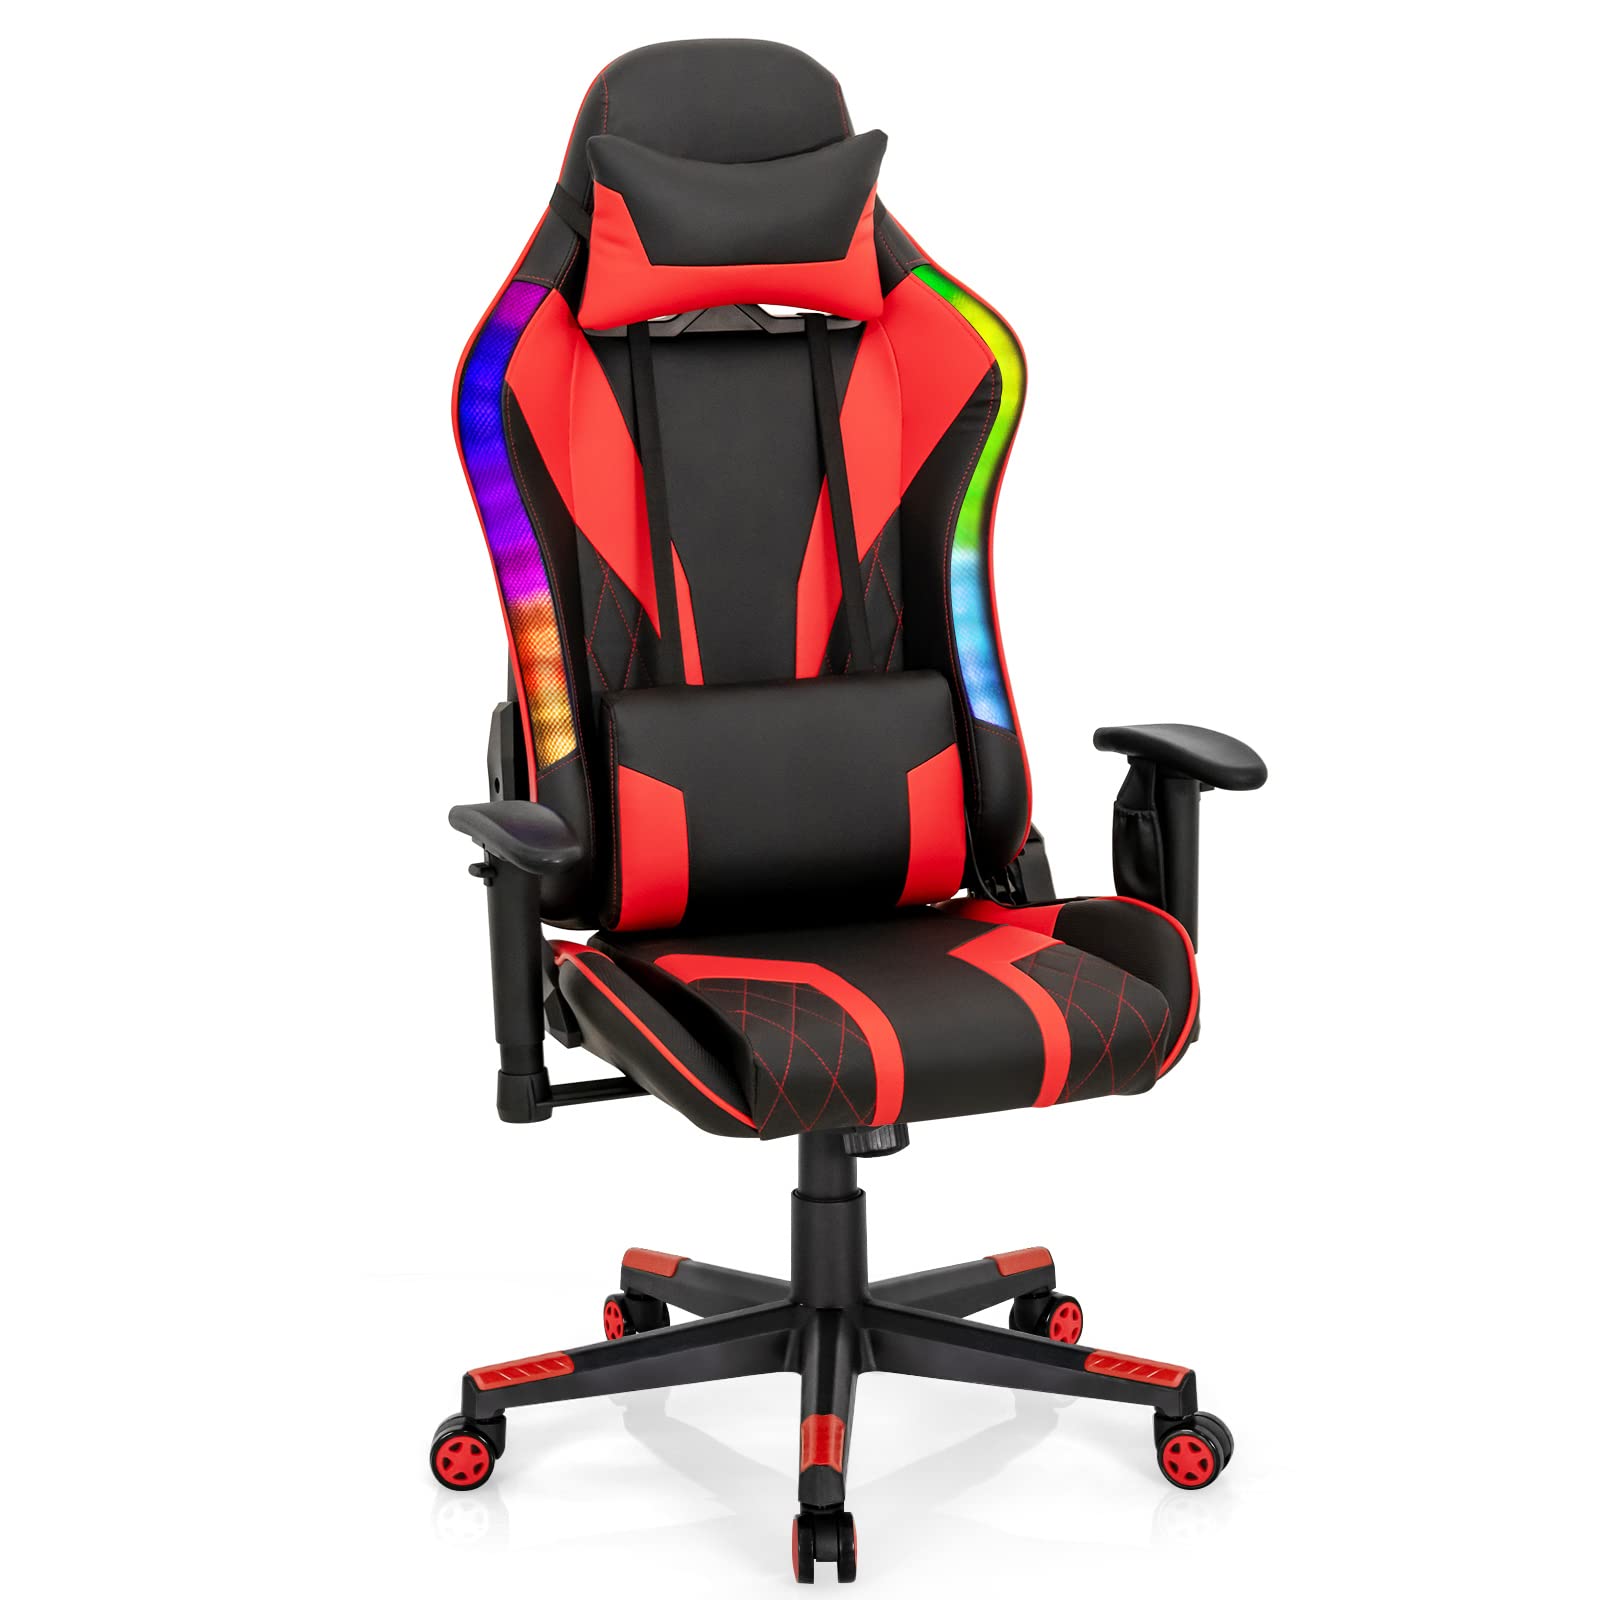 Giantex Gaming Chair with RGB LED Lights, Red